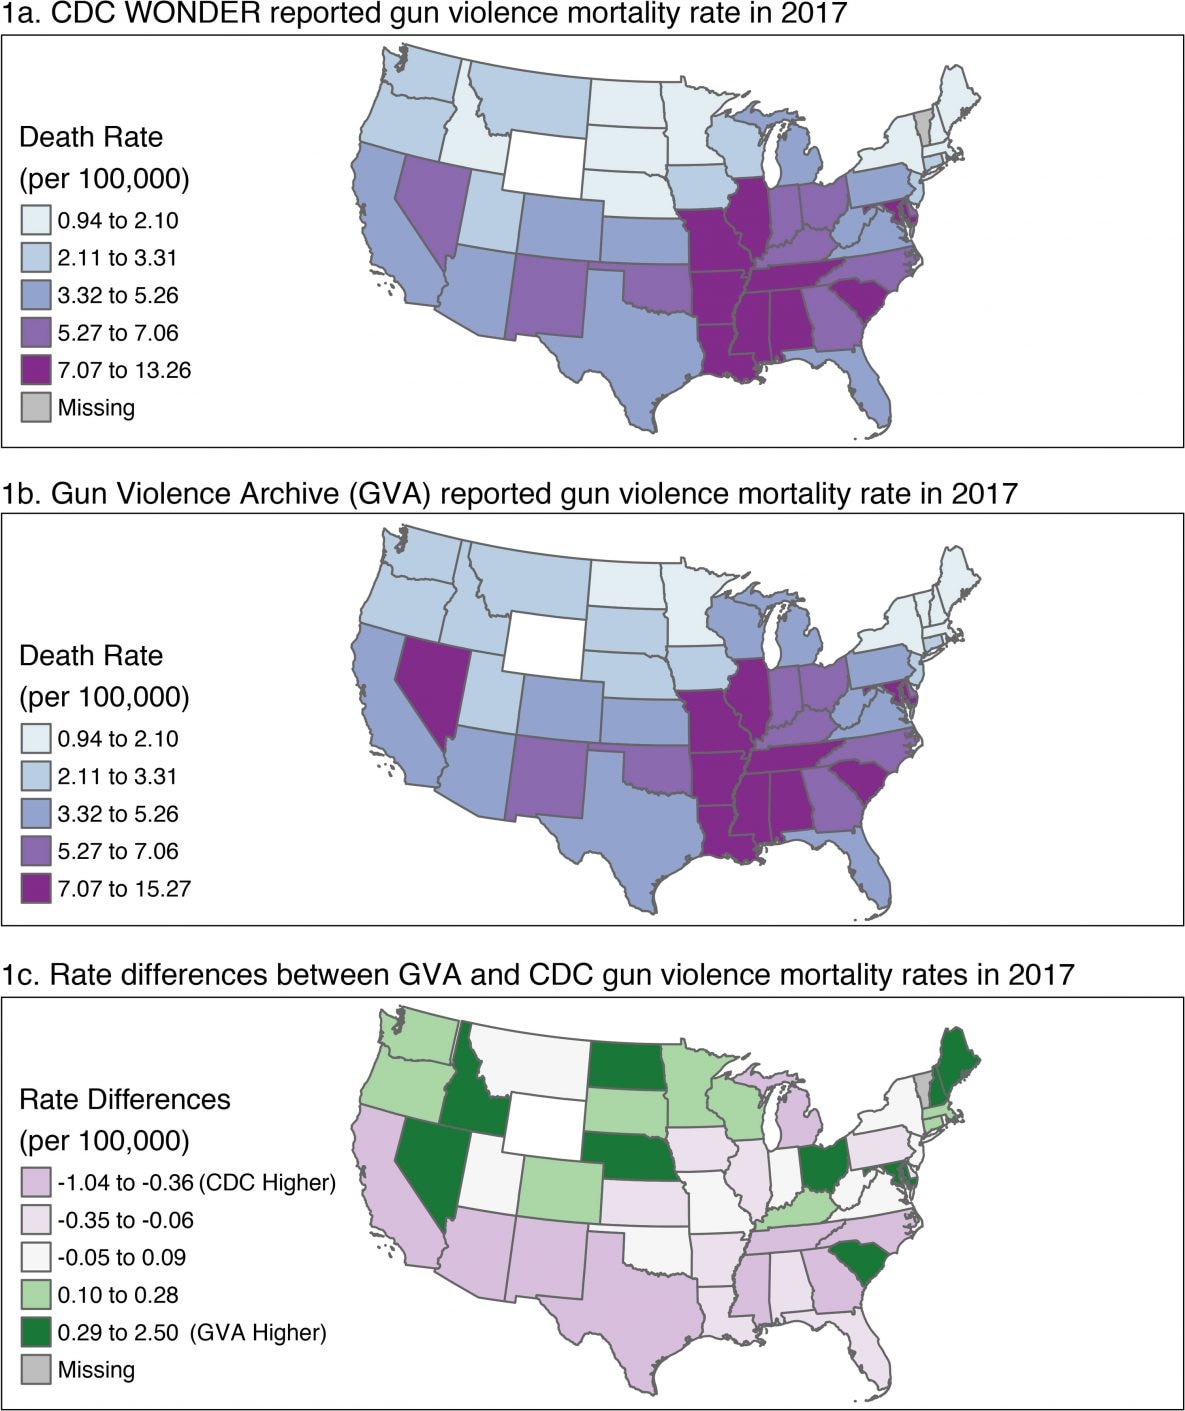 Similar spatial distribution of the unadjusted death rate was observed in both data sets. The CDC data set tended to have higher rates reported in the southern half of the contiguous United States. Unadjusted rate quintiles per 100,000 population are 0.94 to 2.10, 2.11 to 3.31, 3.32 to 5.26, 5.27 to 7.06, and 7.07 to 13.26. The GVA data set tended to have higher rates reported in the northern half. Unadjusted rate quintiles per 100,000 population were the same as for CDC except for the last group, which was 7.07 to 15.27. The rate differences quintiles were −1.04 to −0.36, −0.35 to −0.06, −0.05 to 0.09, 0.10 to 0.2, and 0.29 to 2.50. Data were missing for Vermont.